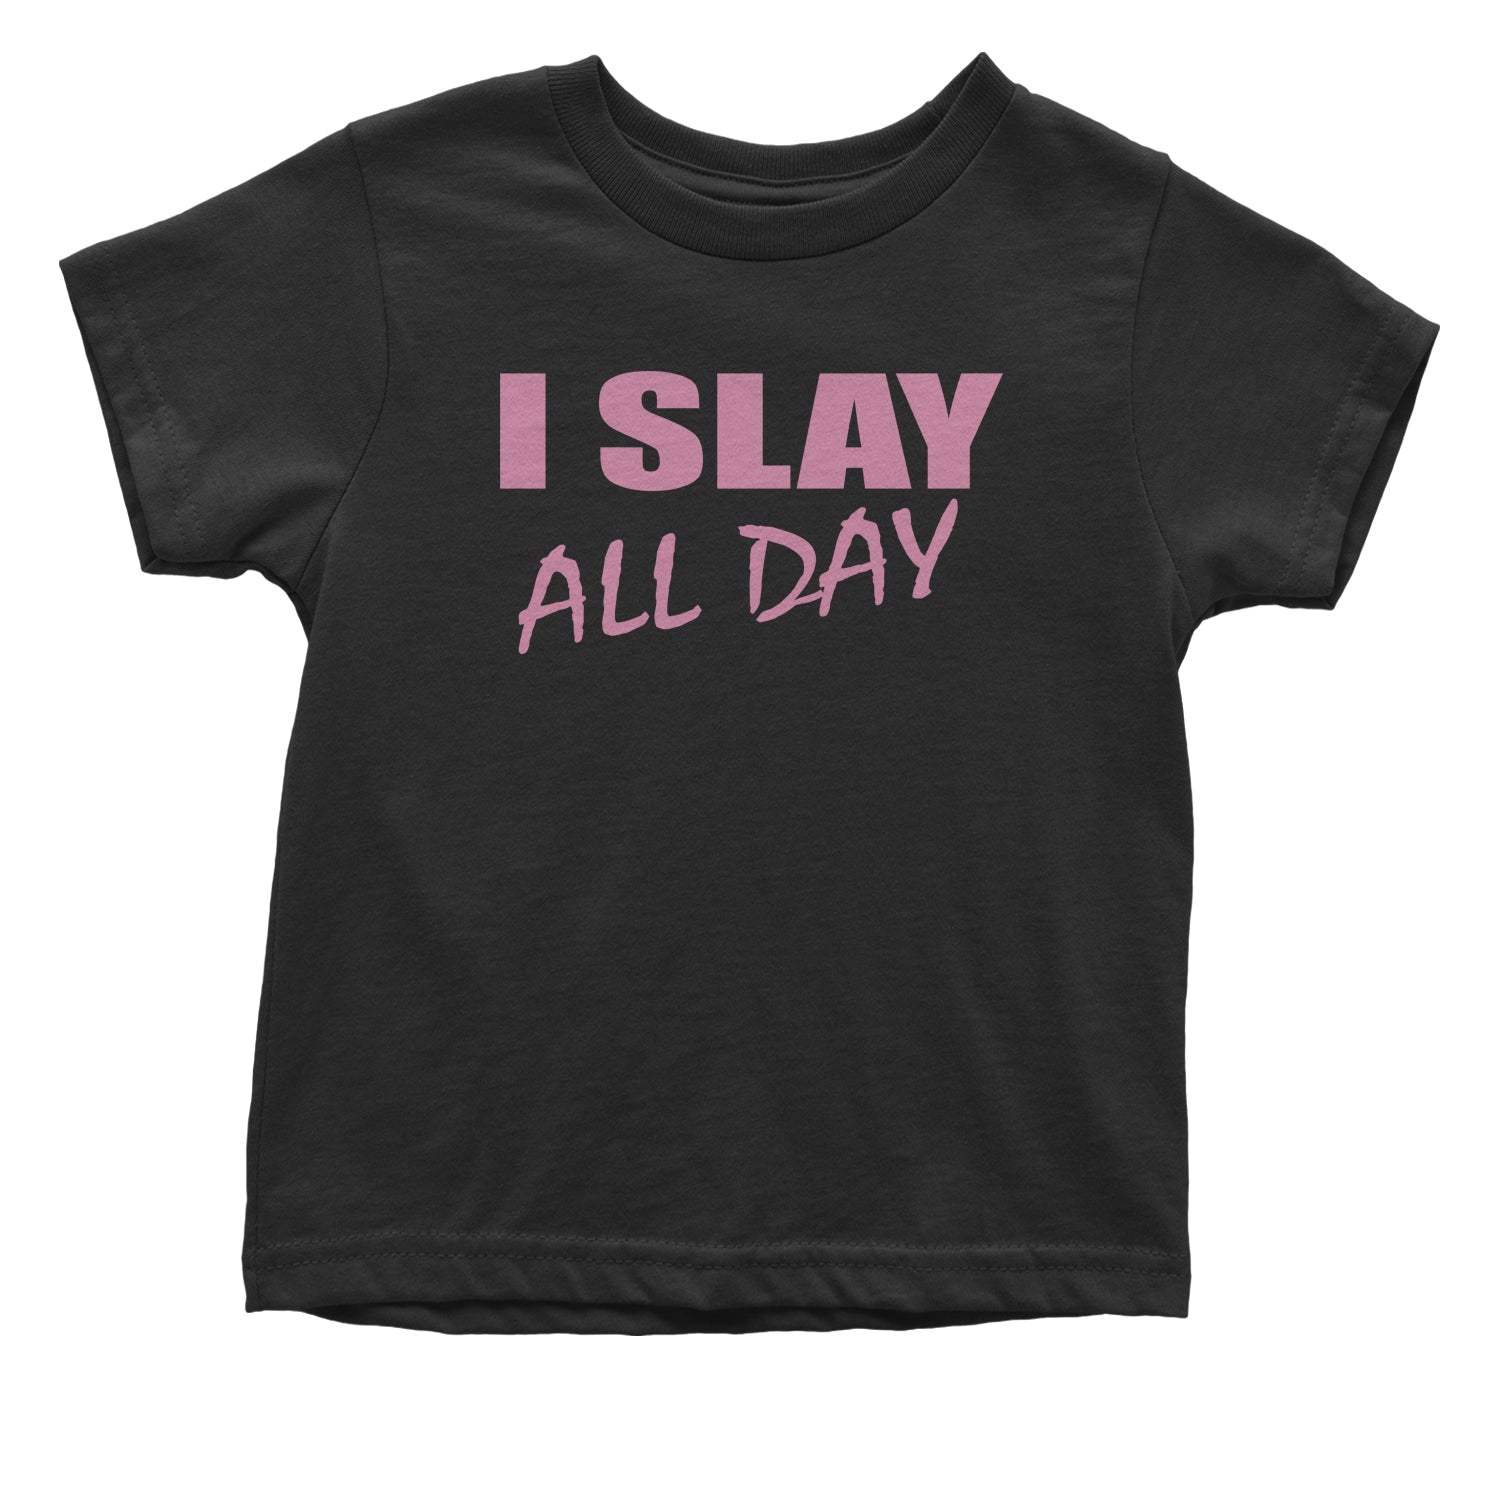 I Slay All Day Toddler T-Shirt all, beyhive, day, formation, slay by Expression Tees